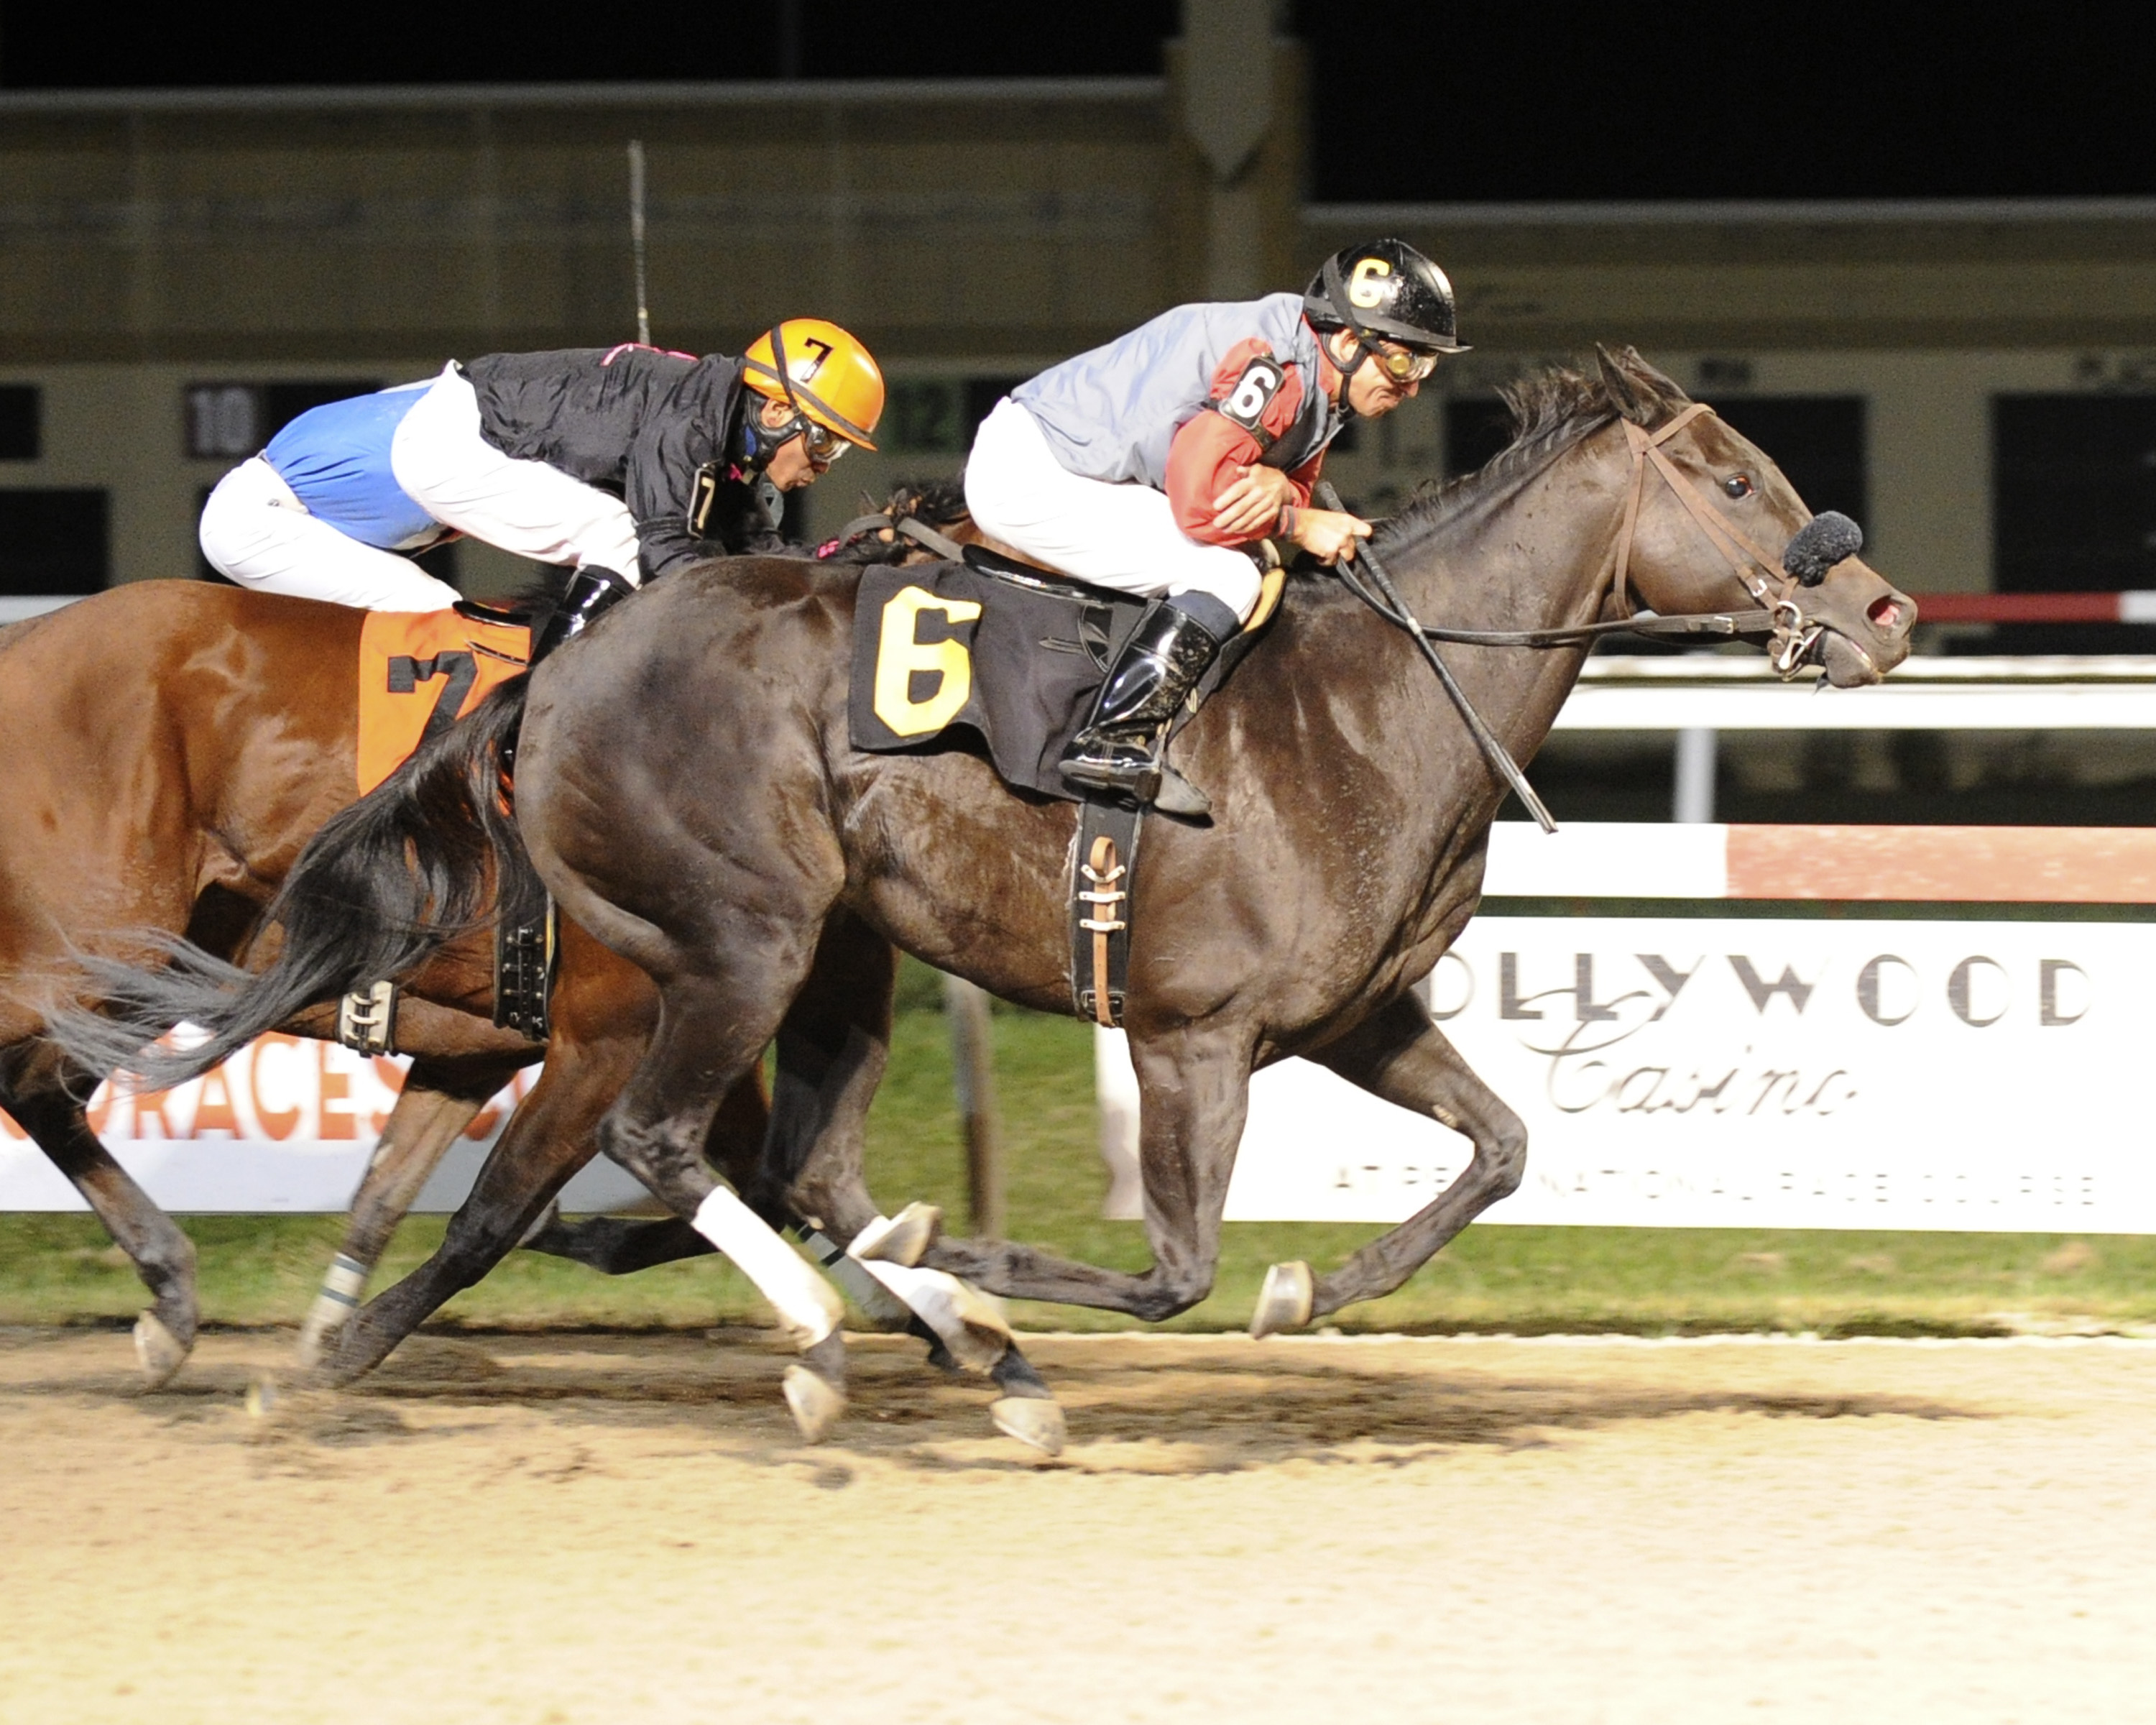 Town Leader, bred by Mr. & Mrs. Bertram Firestone, has won 2 at Laurel & 2 at Charles Town this year. Photo by Coady Photography.